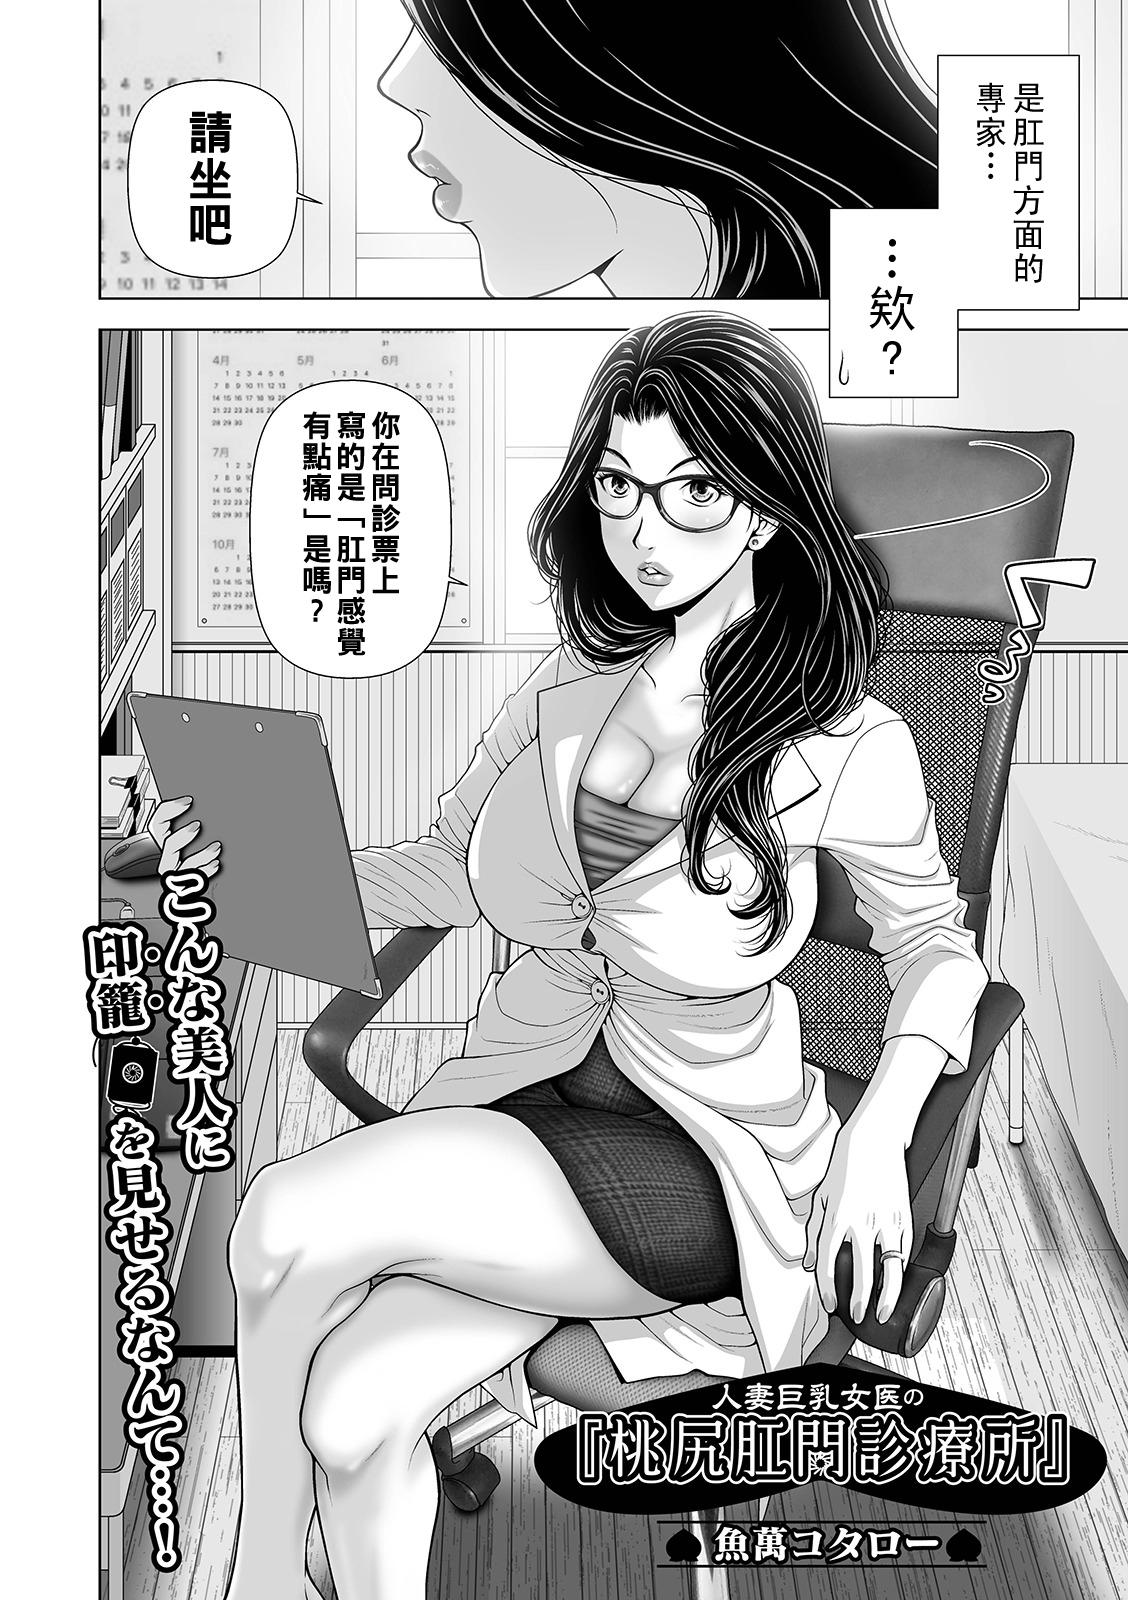 Step Dad 人妻巨乳女医の『桃尻肛門診療所』（Chinese） Monstercock - Page 2